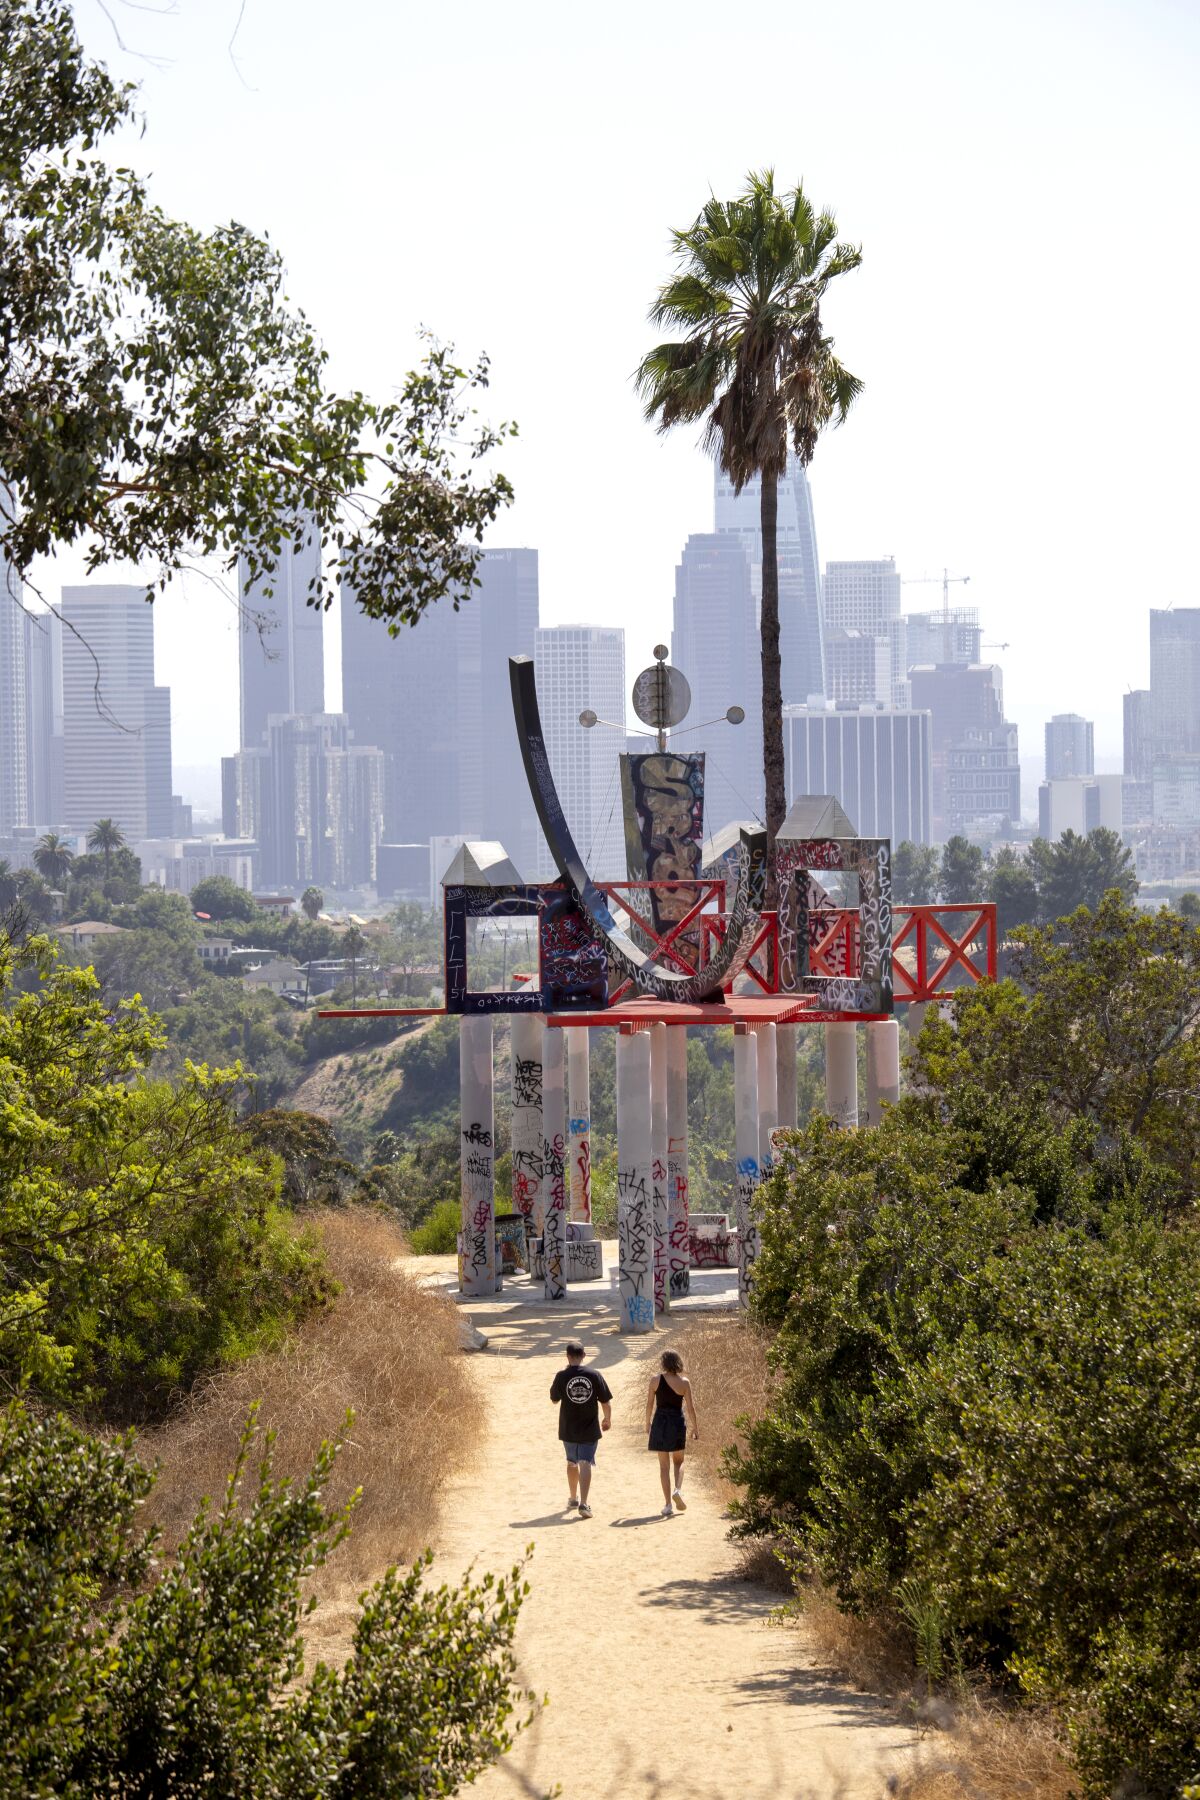 Peter Shire's large and whimsical art installation at Angels Point is a popular tourist attraction. But nearby, benches offer one of the best views of downtown L.A.'s skyline.